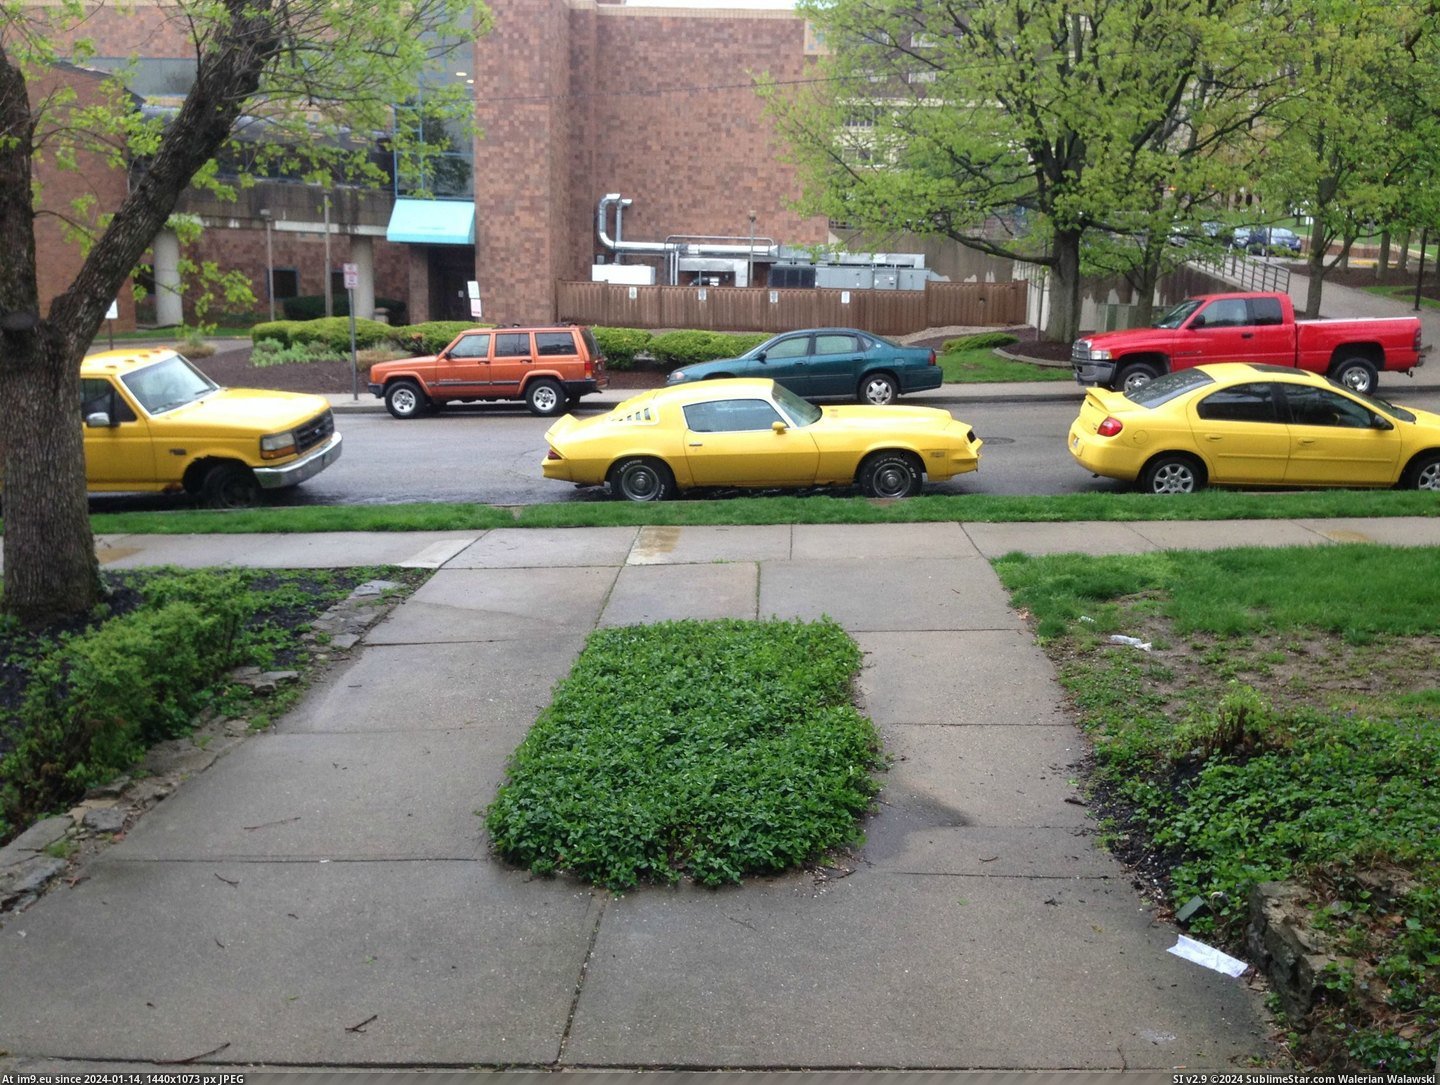 #Morning #Apartment #Row #Parked #Yellow #Cars [Mildlyinteresting] These 3 yellow cars were parked in a row outside my apartment this morning Pic. (Image of album My r/MILDLYINTERESTING favs))